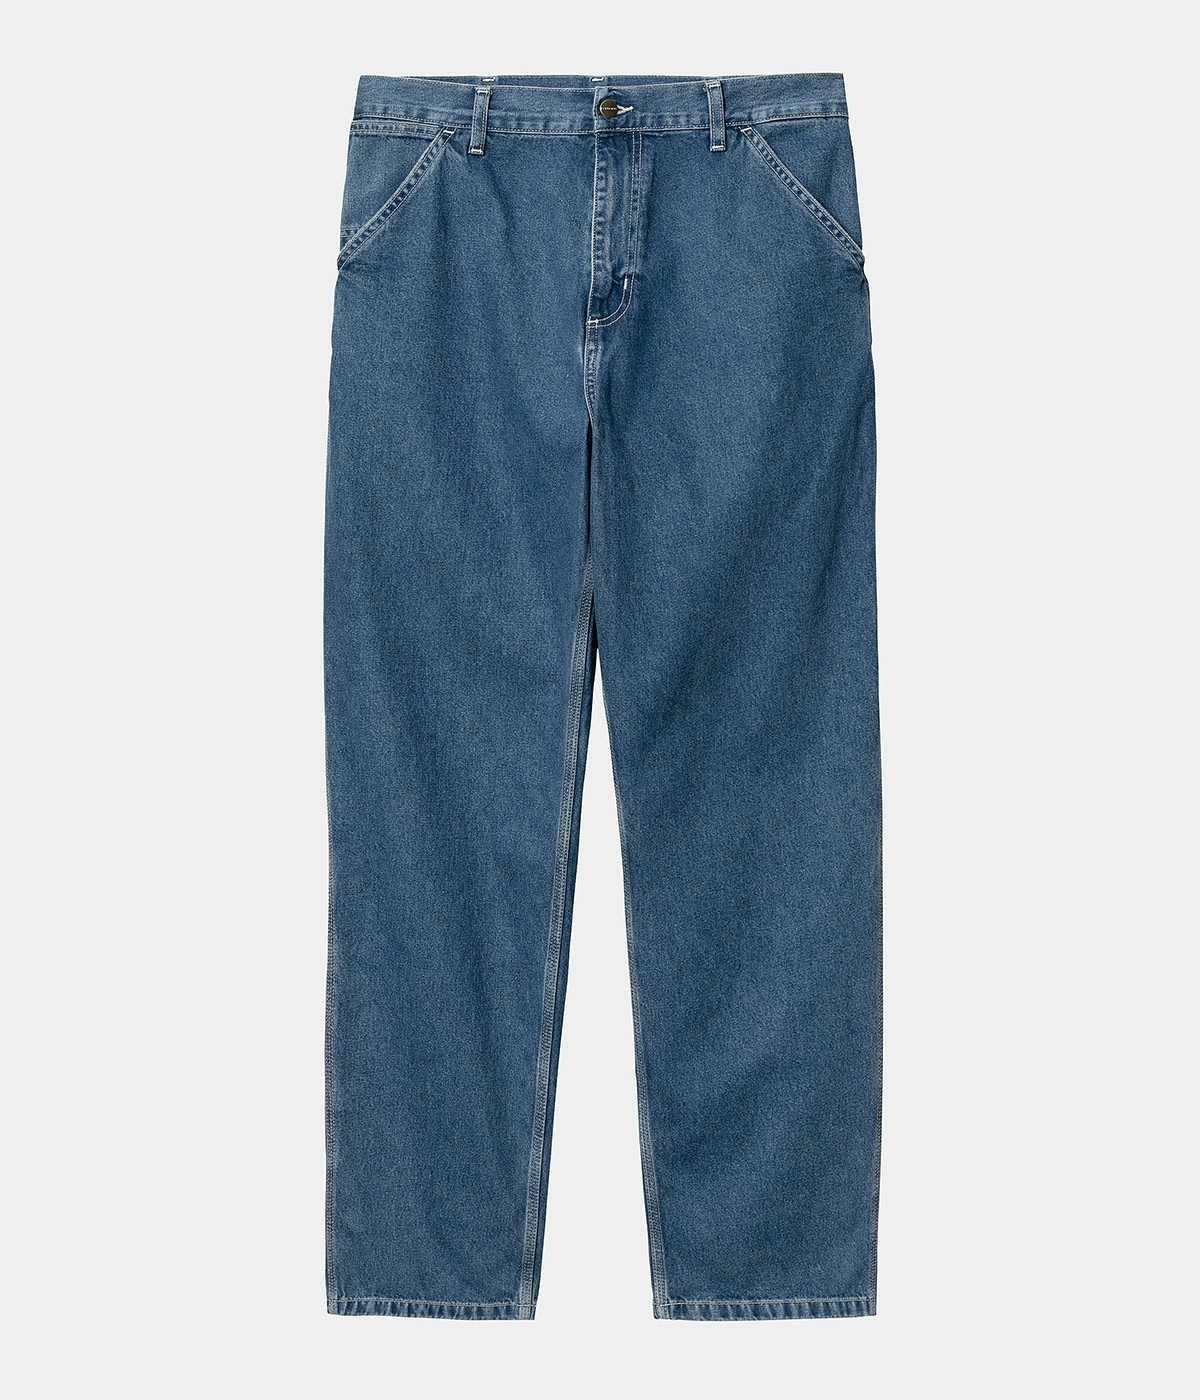 Carhartt Pant Simple Blue/Stone washed 3